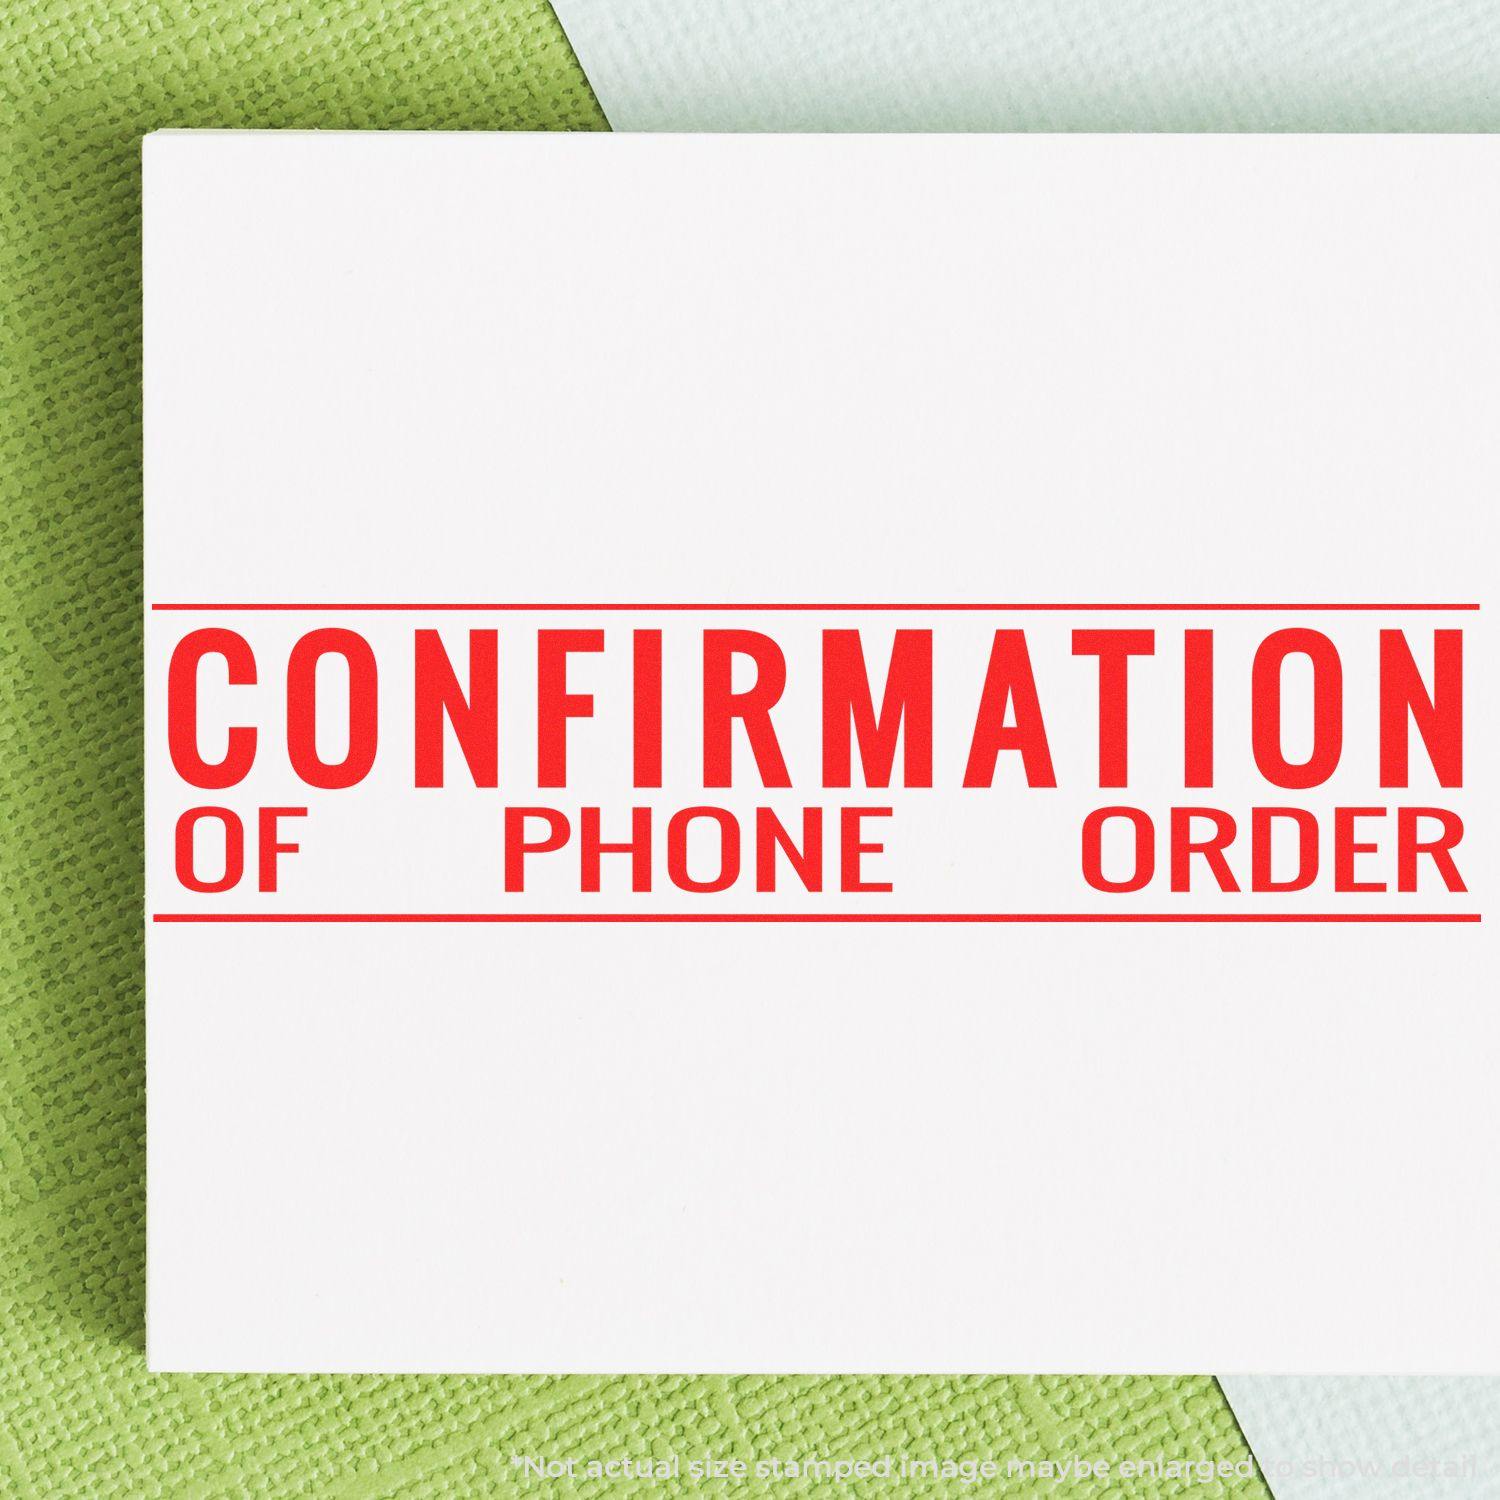 A stock office pre-inked stamp with a stamped image showing how the text "CONFIRMATION OF PHONE ORDER" is displayed after stamping.